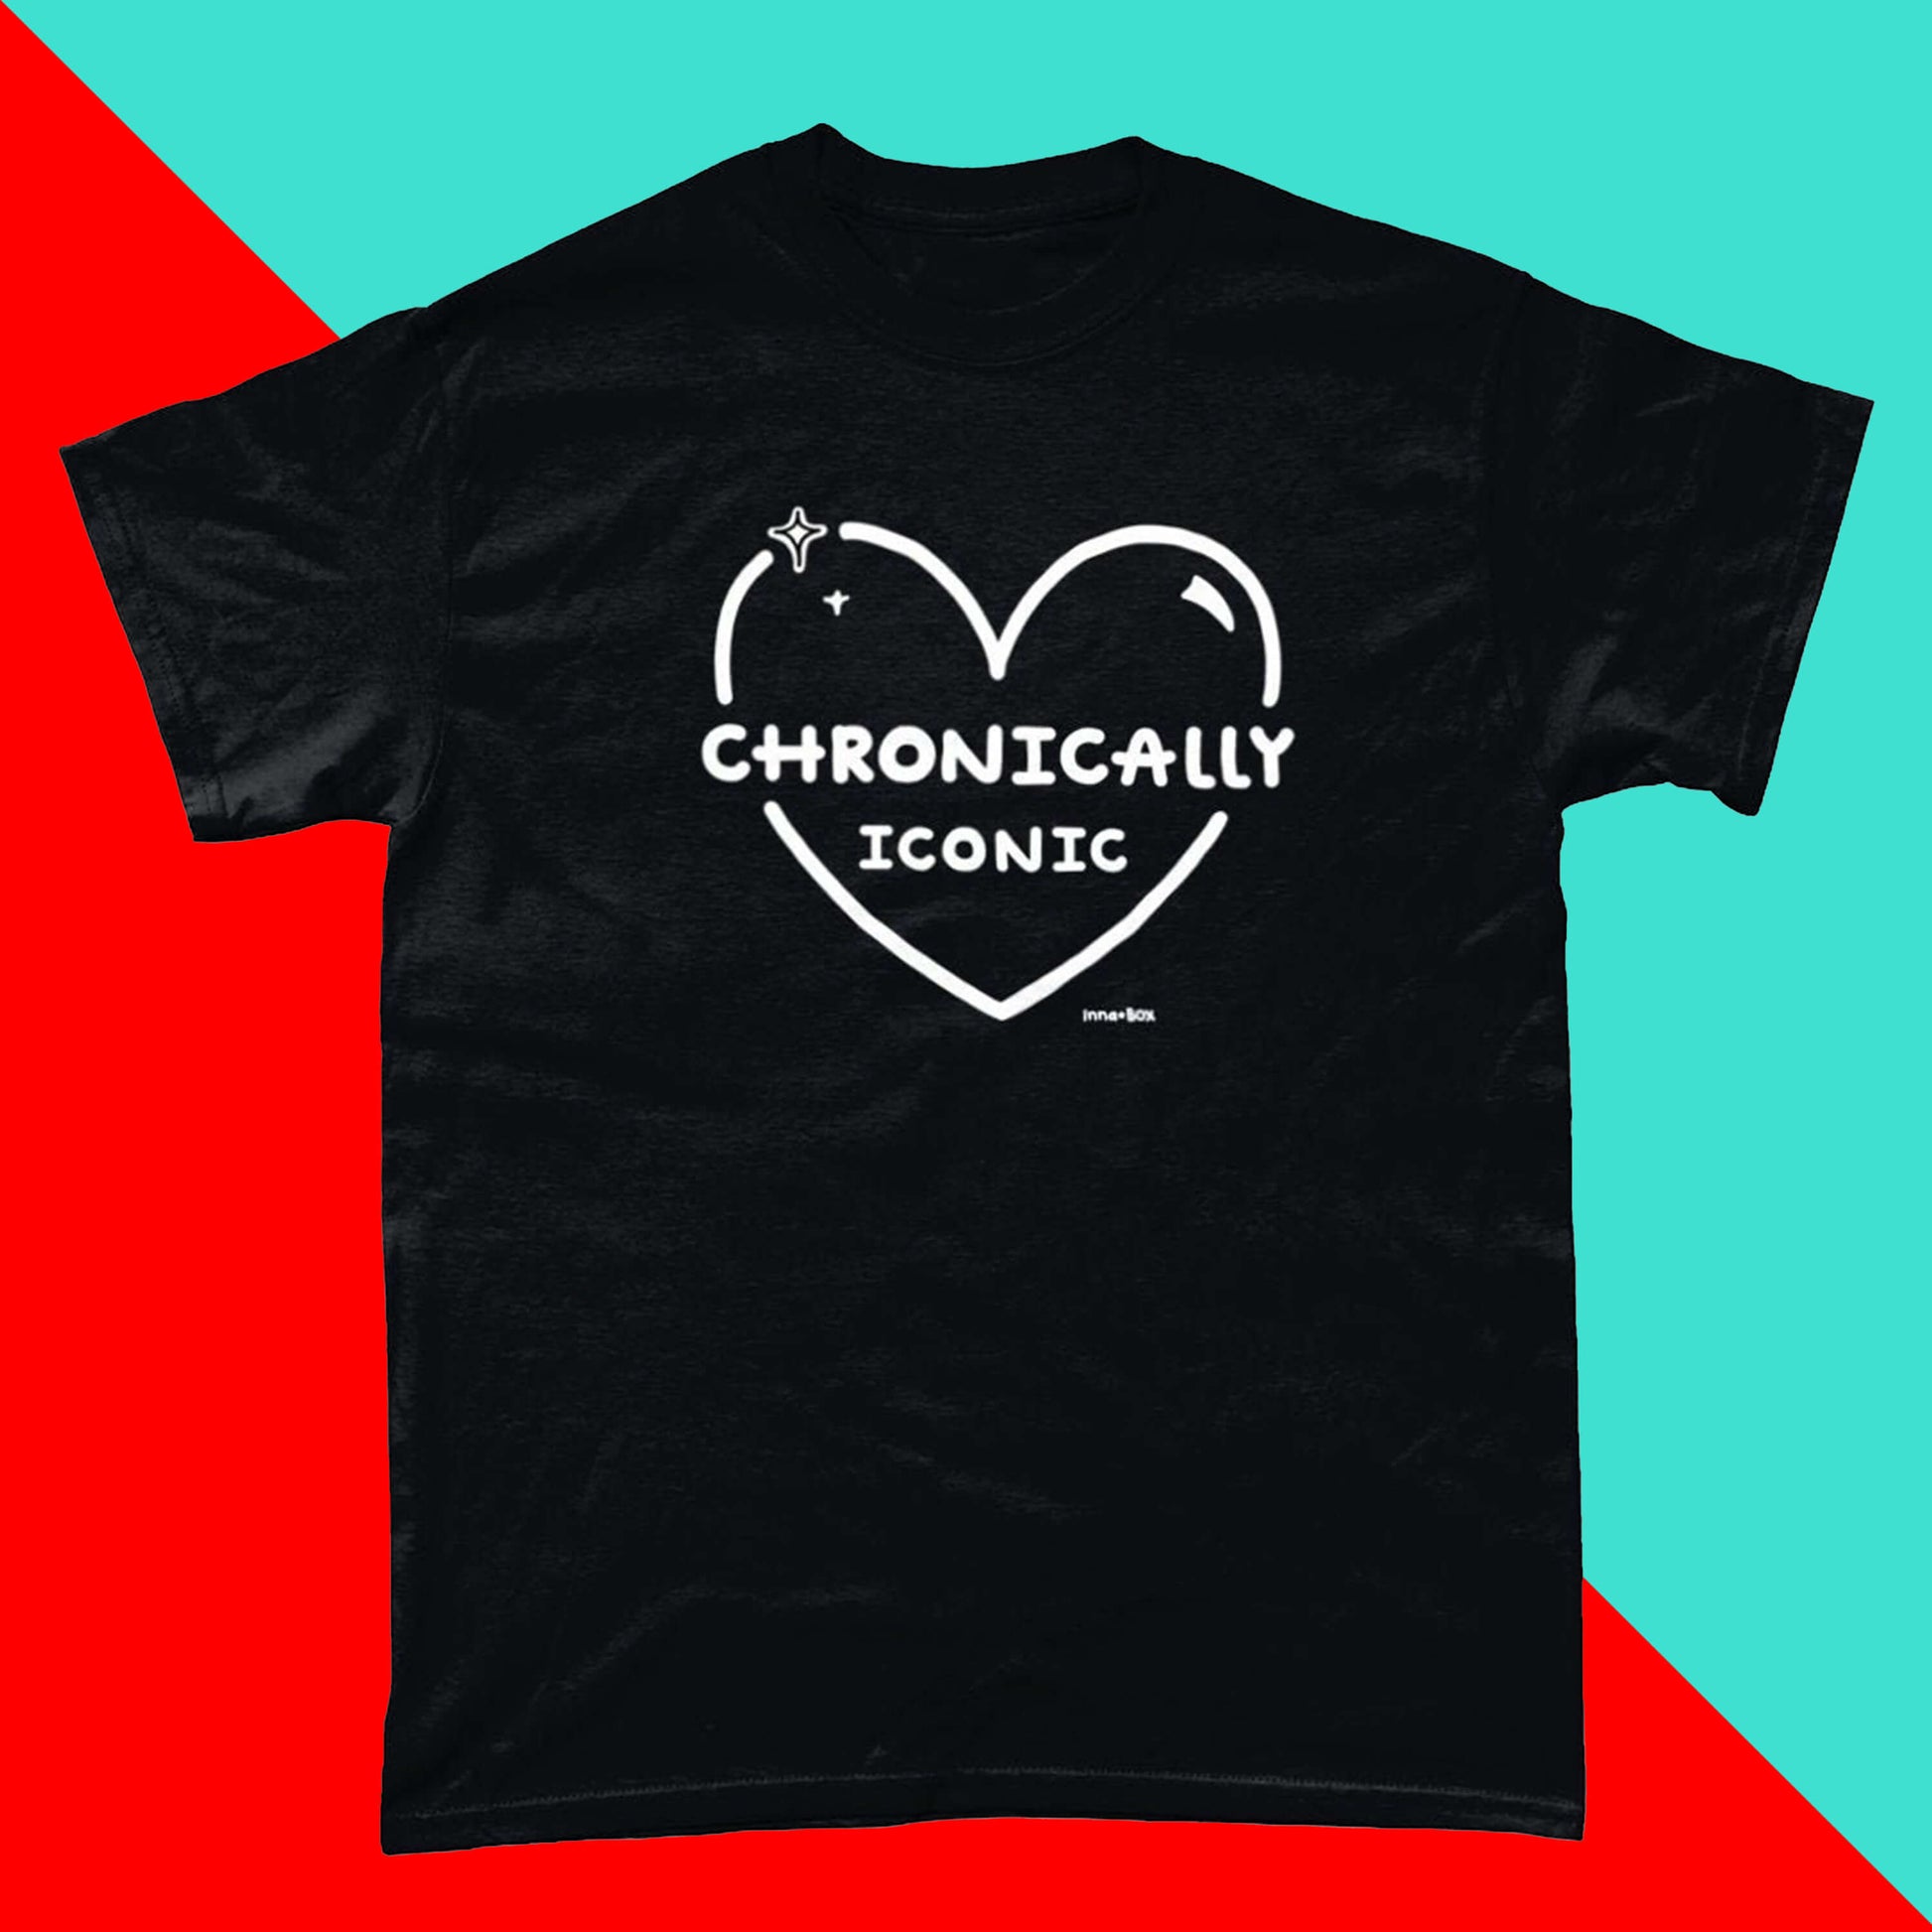 The Chronically Iconic black tee on a red and blue background. The short sleeve t-shirt features a white heart outline with sparkles and centre text reading 'chronically iconic' with the innabox logo underneath. The design is raising awareness for chronic illness and invisible illness.